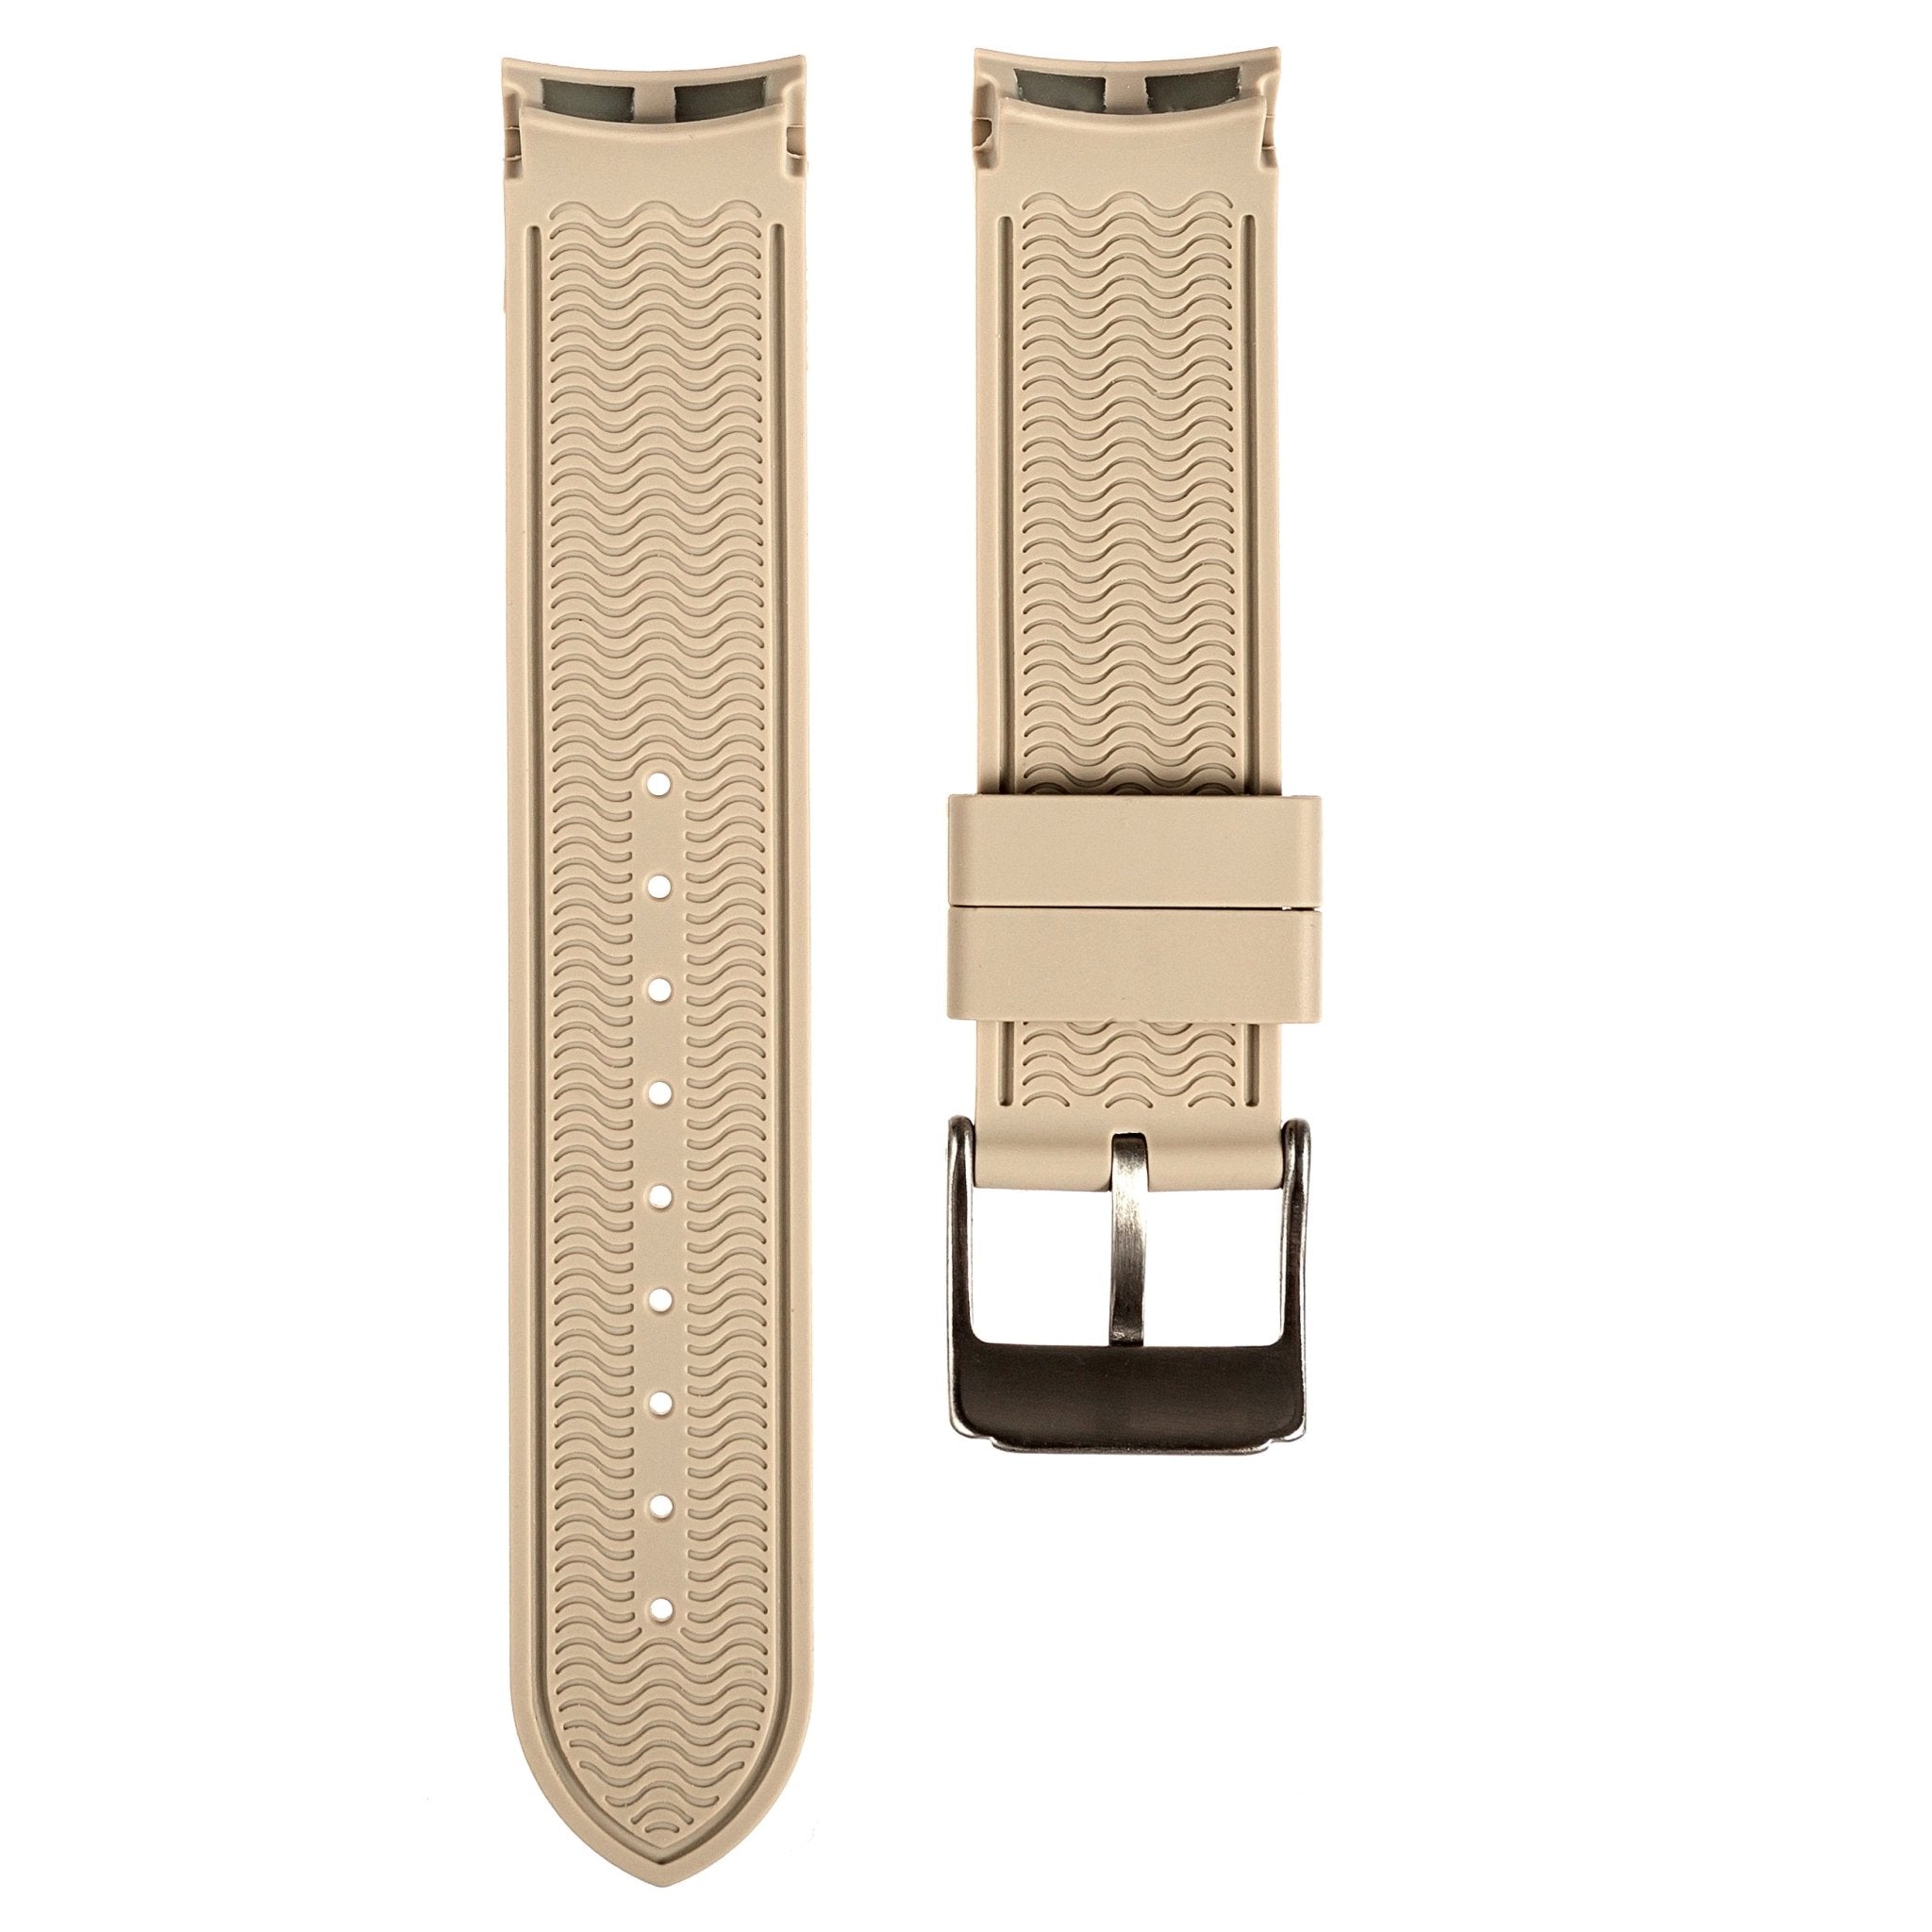 Paramount Curved End Premium Silicone Strap – Nude (2404) -StrapSeeker